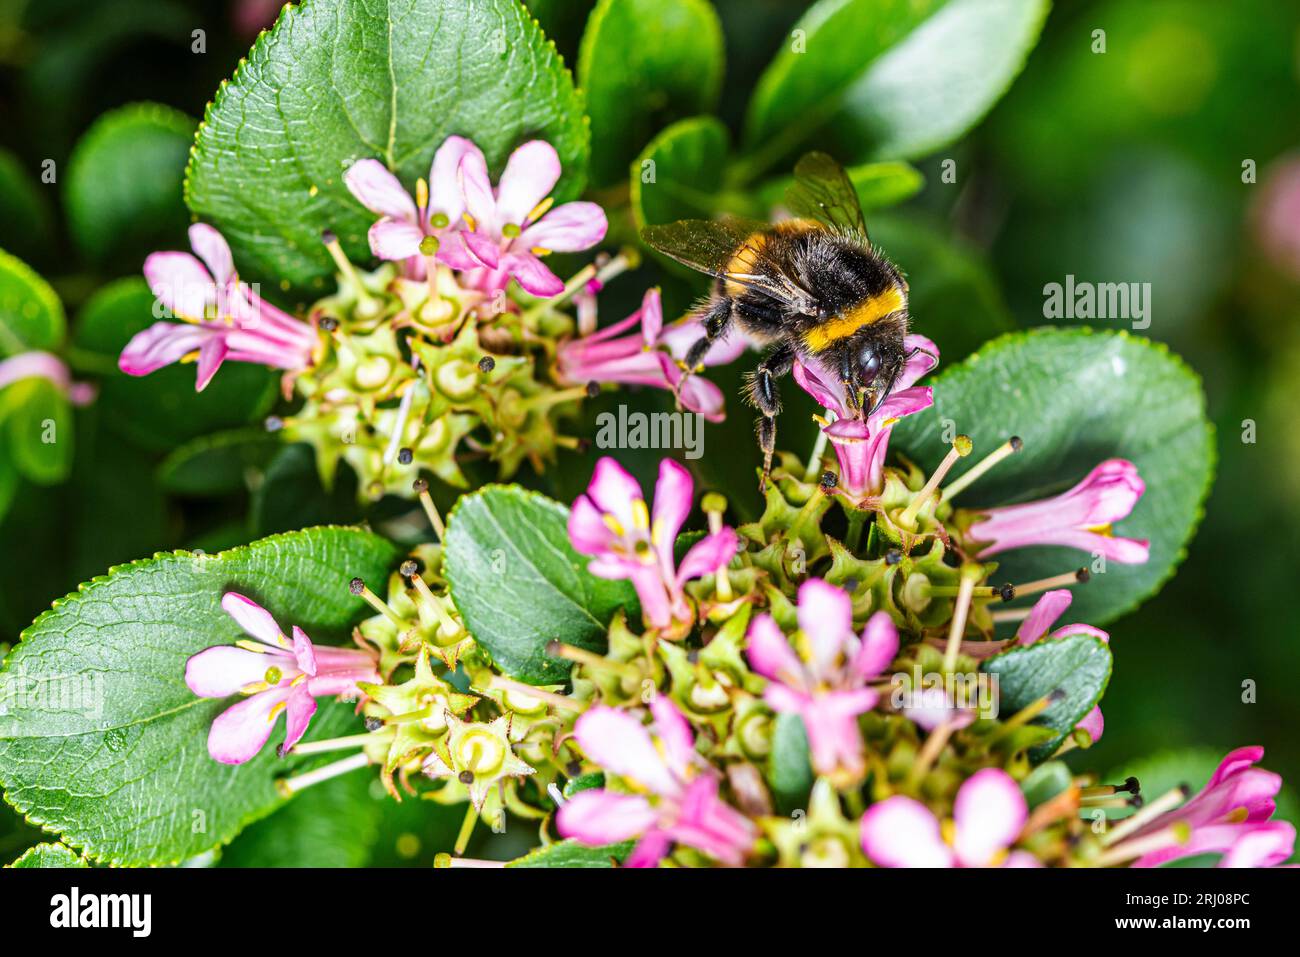 White tailed bumblebee taking nectar from Escallonia blossom. Stock Photo